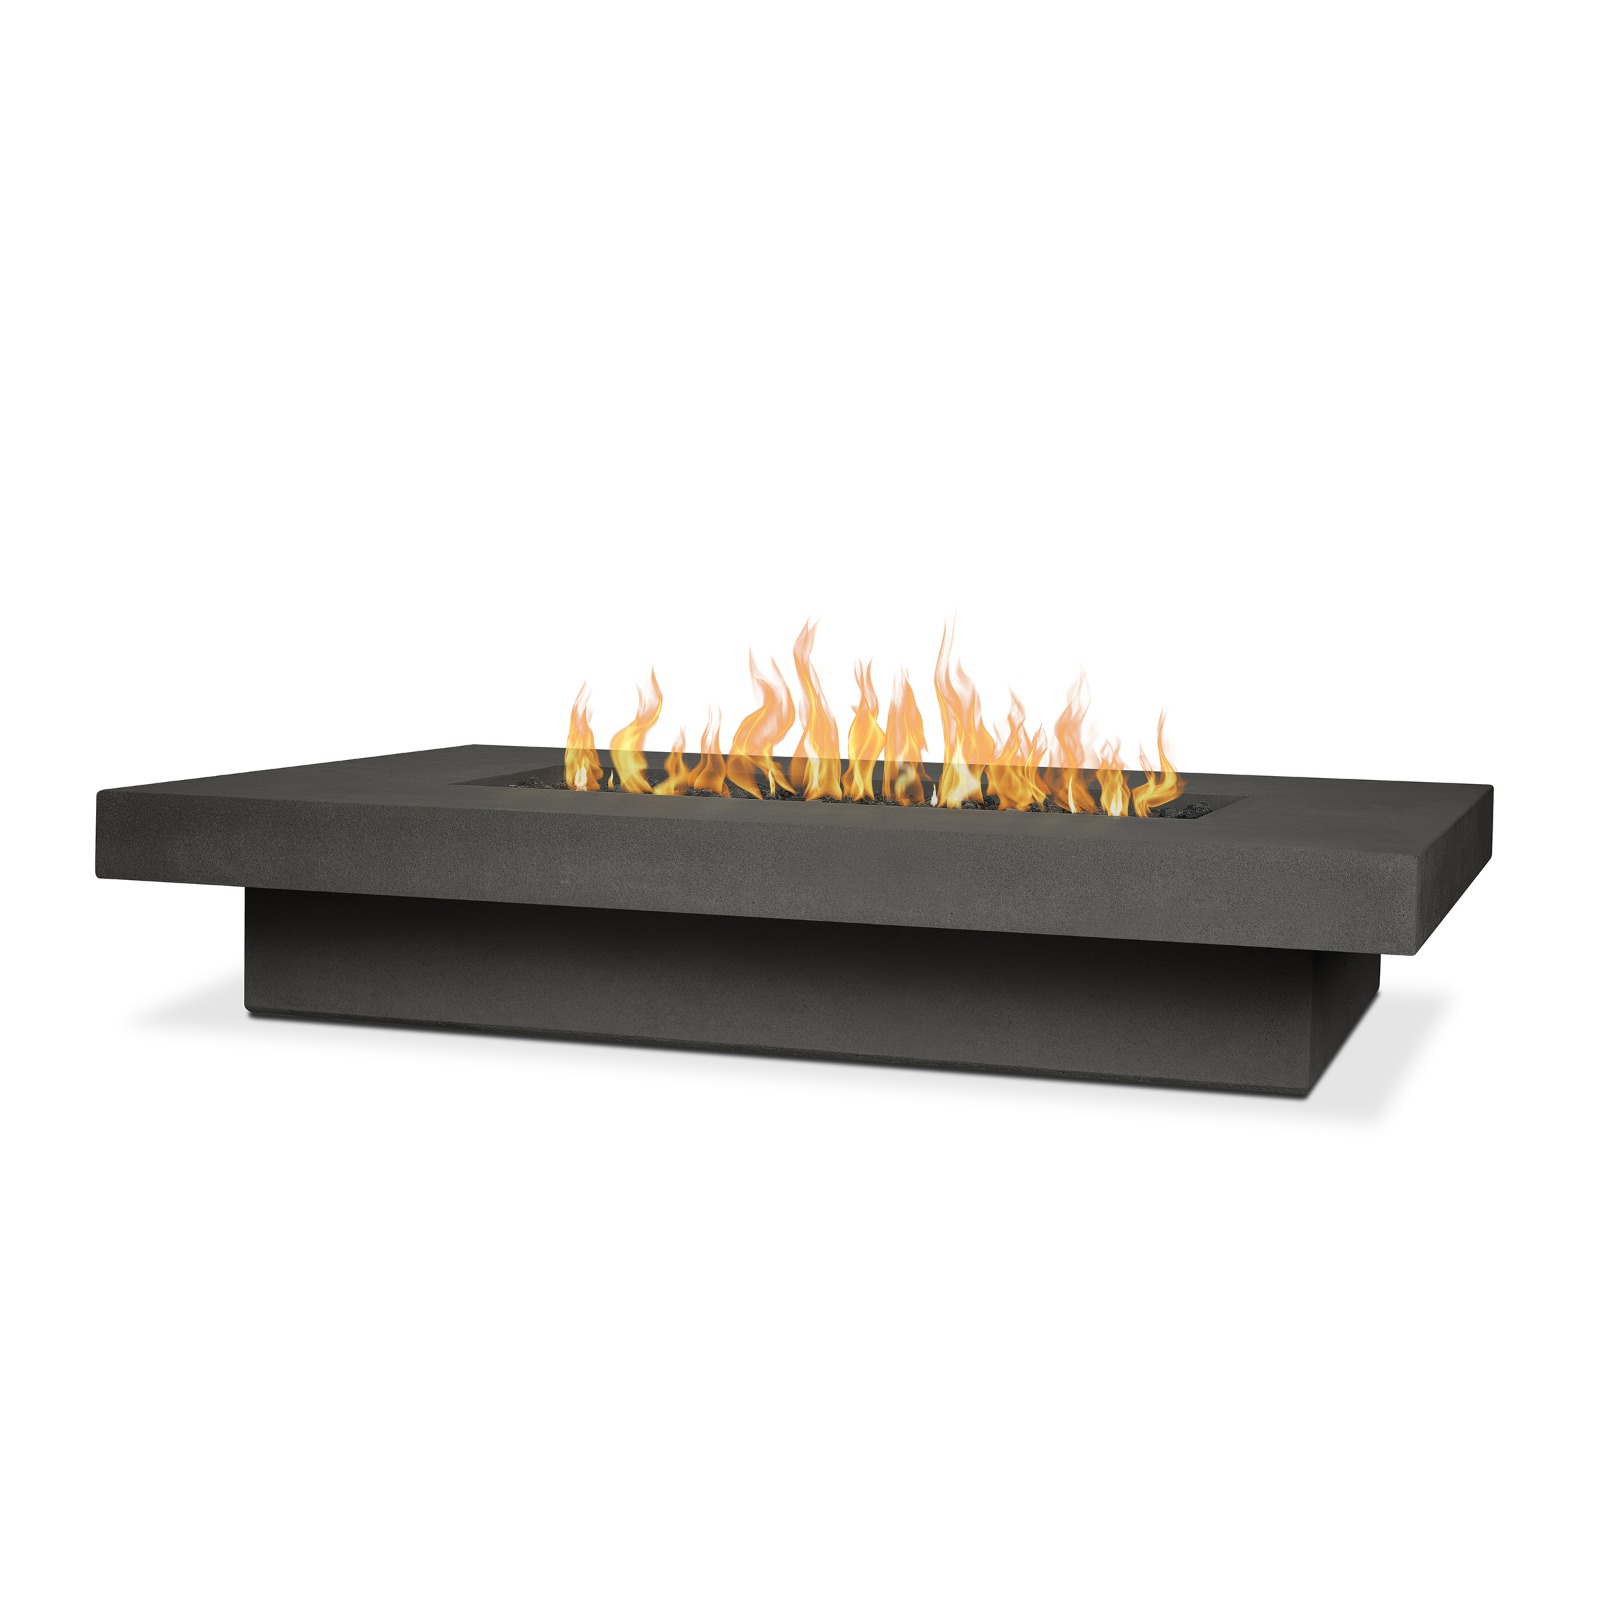 Geneva Low 72" Rectangle GFRC Outdoor Natural Gas or Propane Fire Pit Fireplace Fire Table for Backyard or Patio